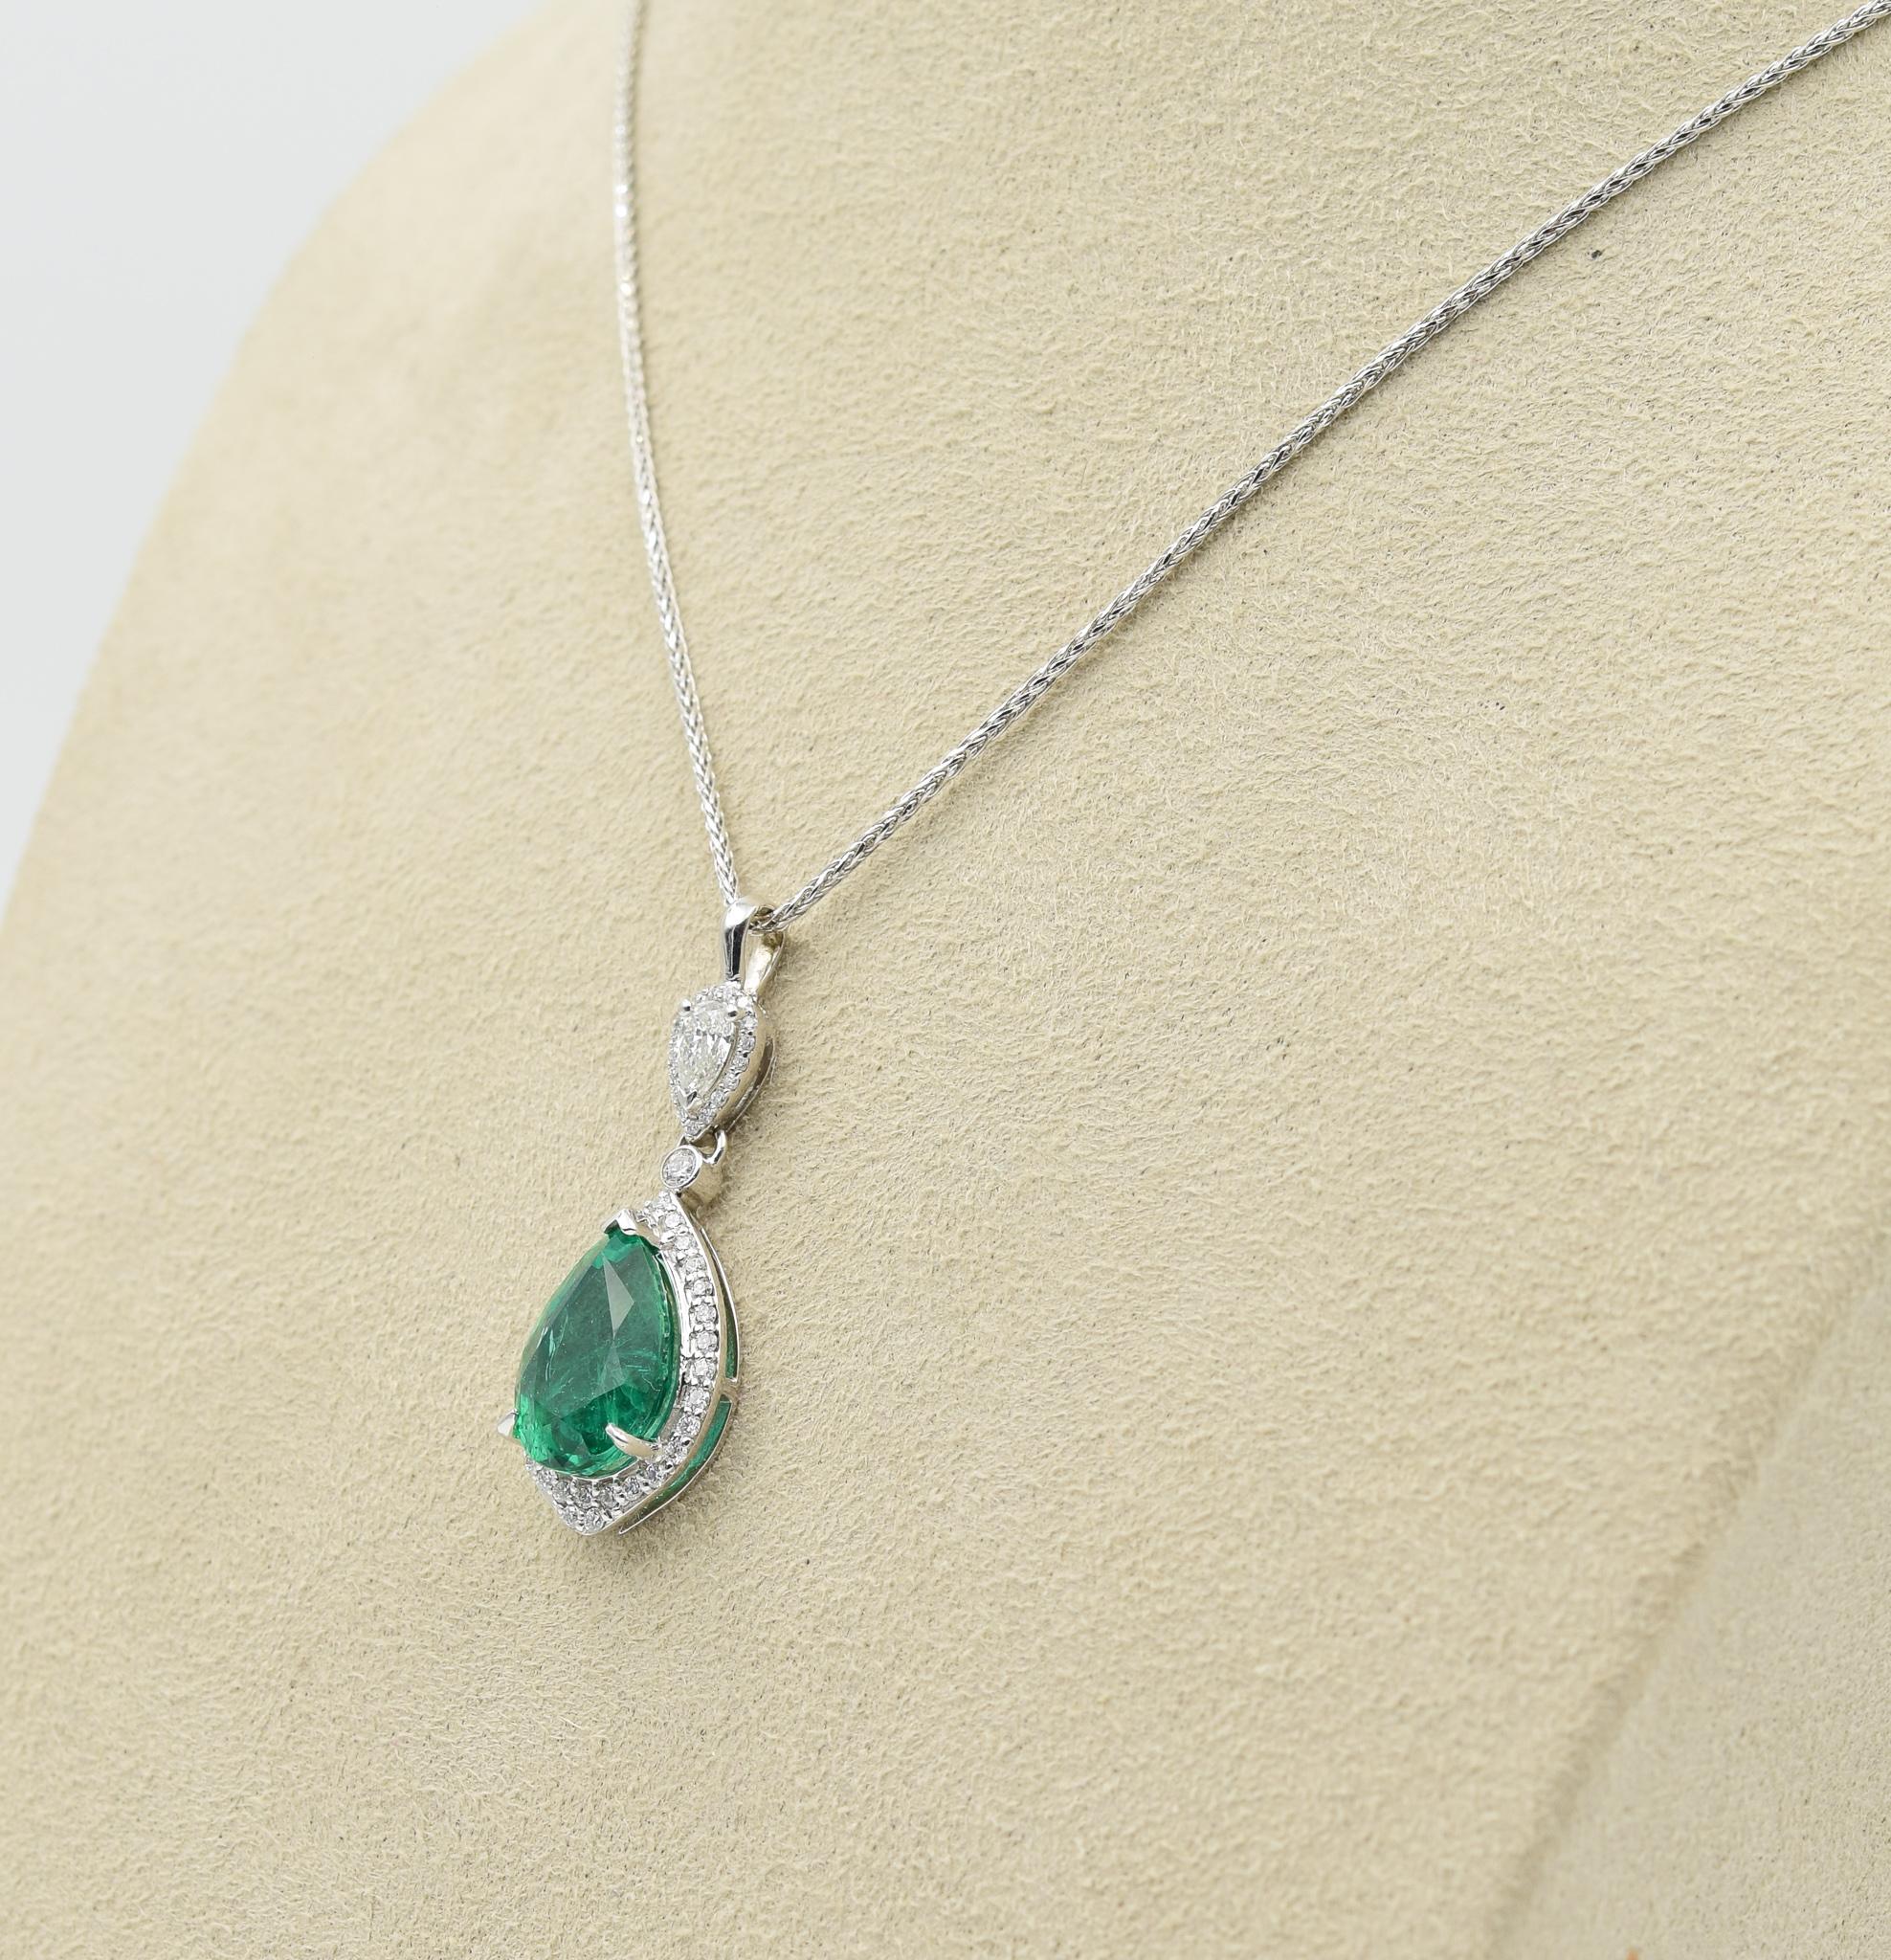 This gorgeous drop pendant has a 3.71 carat center fine quality emerald center-stone and is adorned with high-quality white diamonds. It is crafted in 18k white gold with dazzling diamonds with a sparkle you can't miss. This piece is simple but